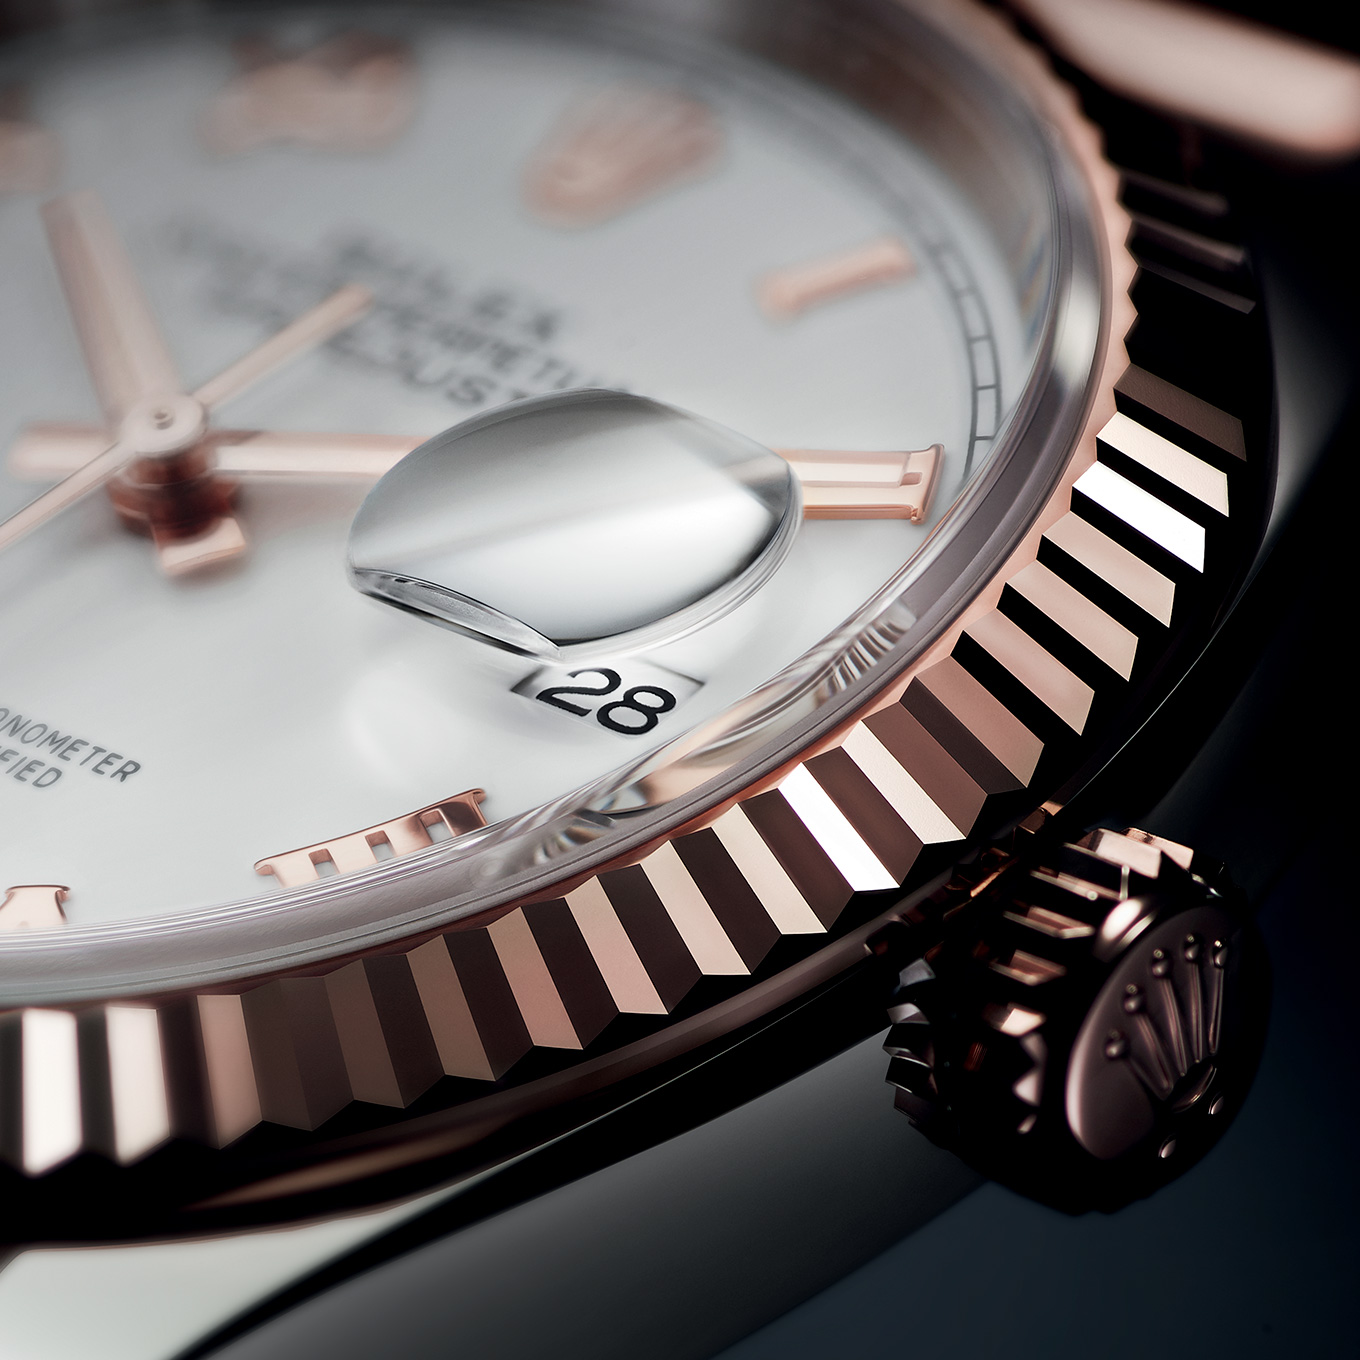 The Rolex Datejust Collection | Newsroom